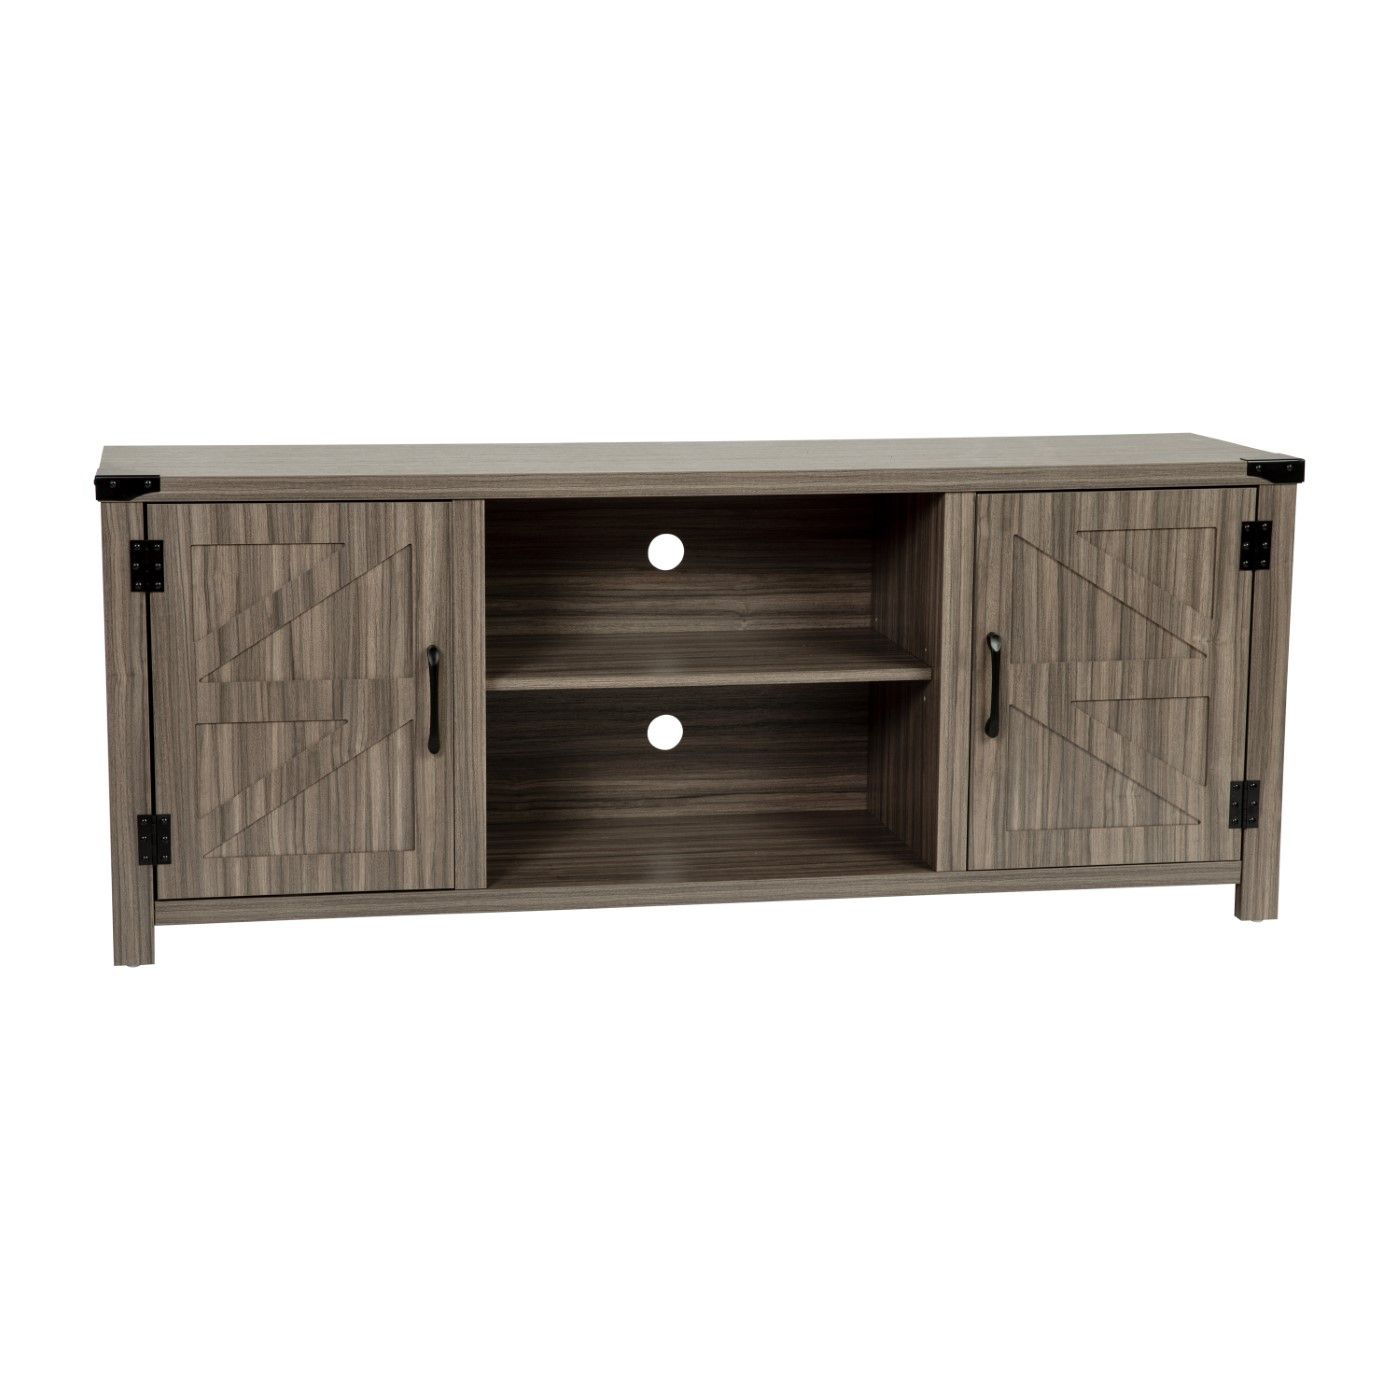 Ayrith Modern Farmhouse Barn Door Tv Stand – Gray Wash Oak For Tv'S Up To  65 Inches – 59" Entertainment Center With Adjustable Shelf Within Modern Farmhouse Barn Tv Stands (View 7 of 15)